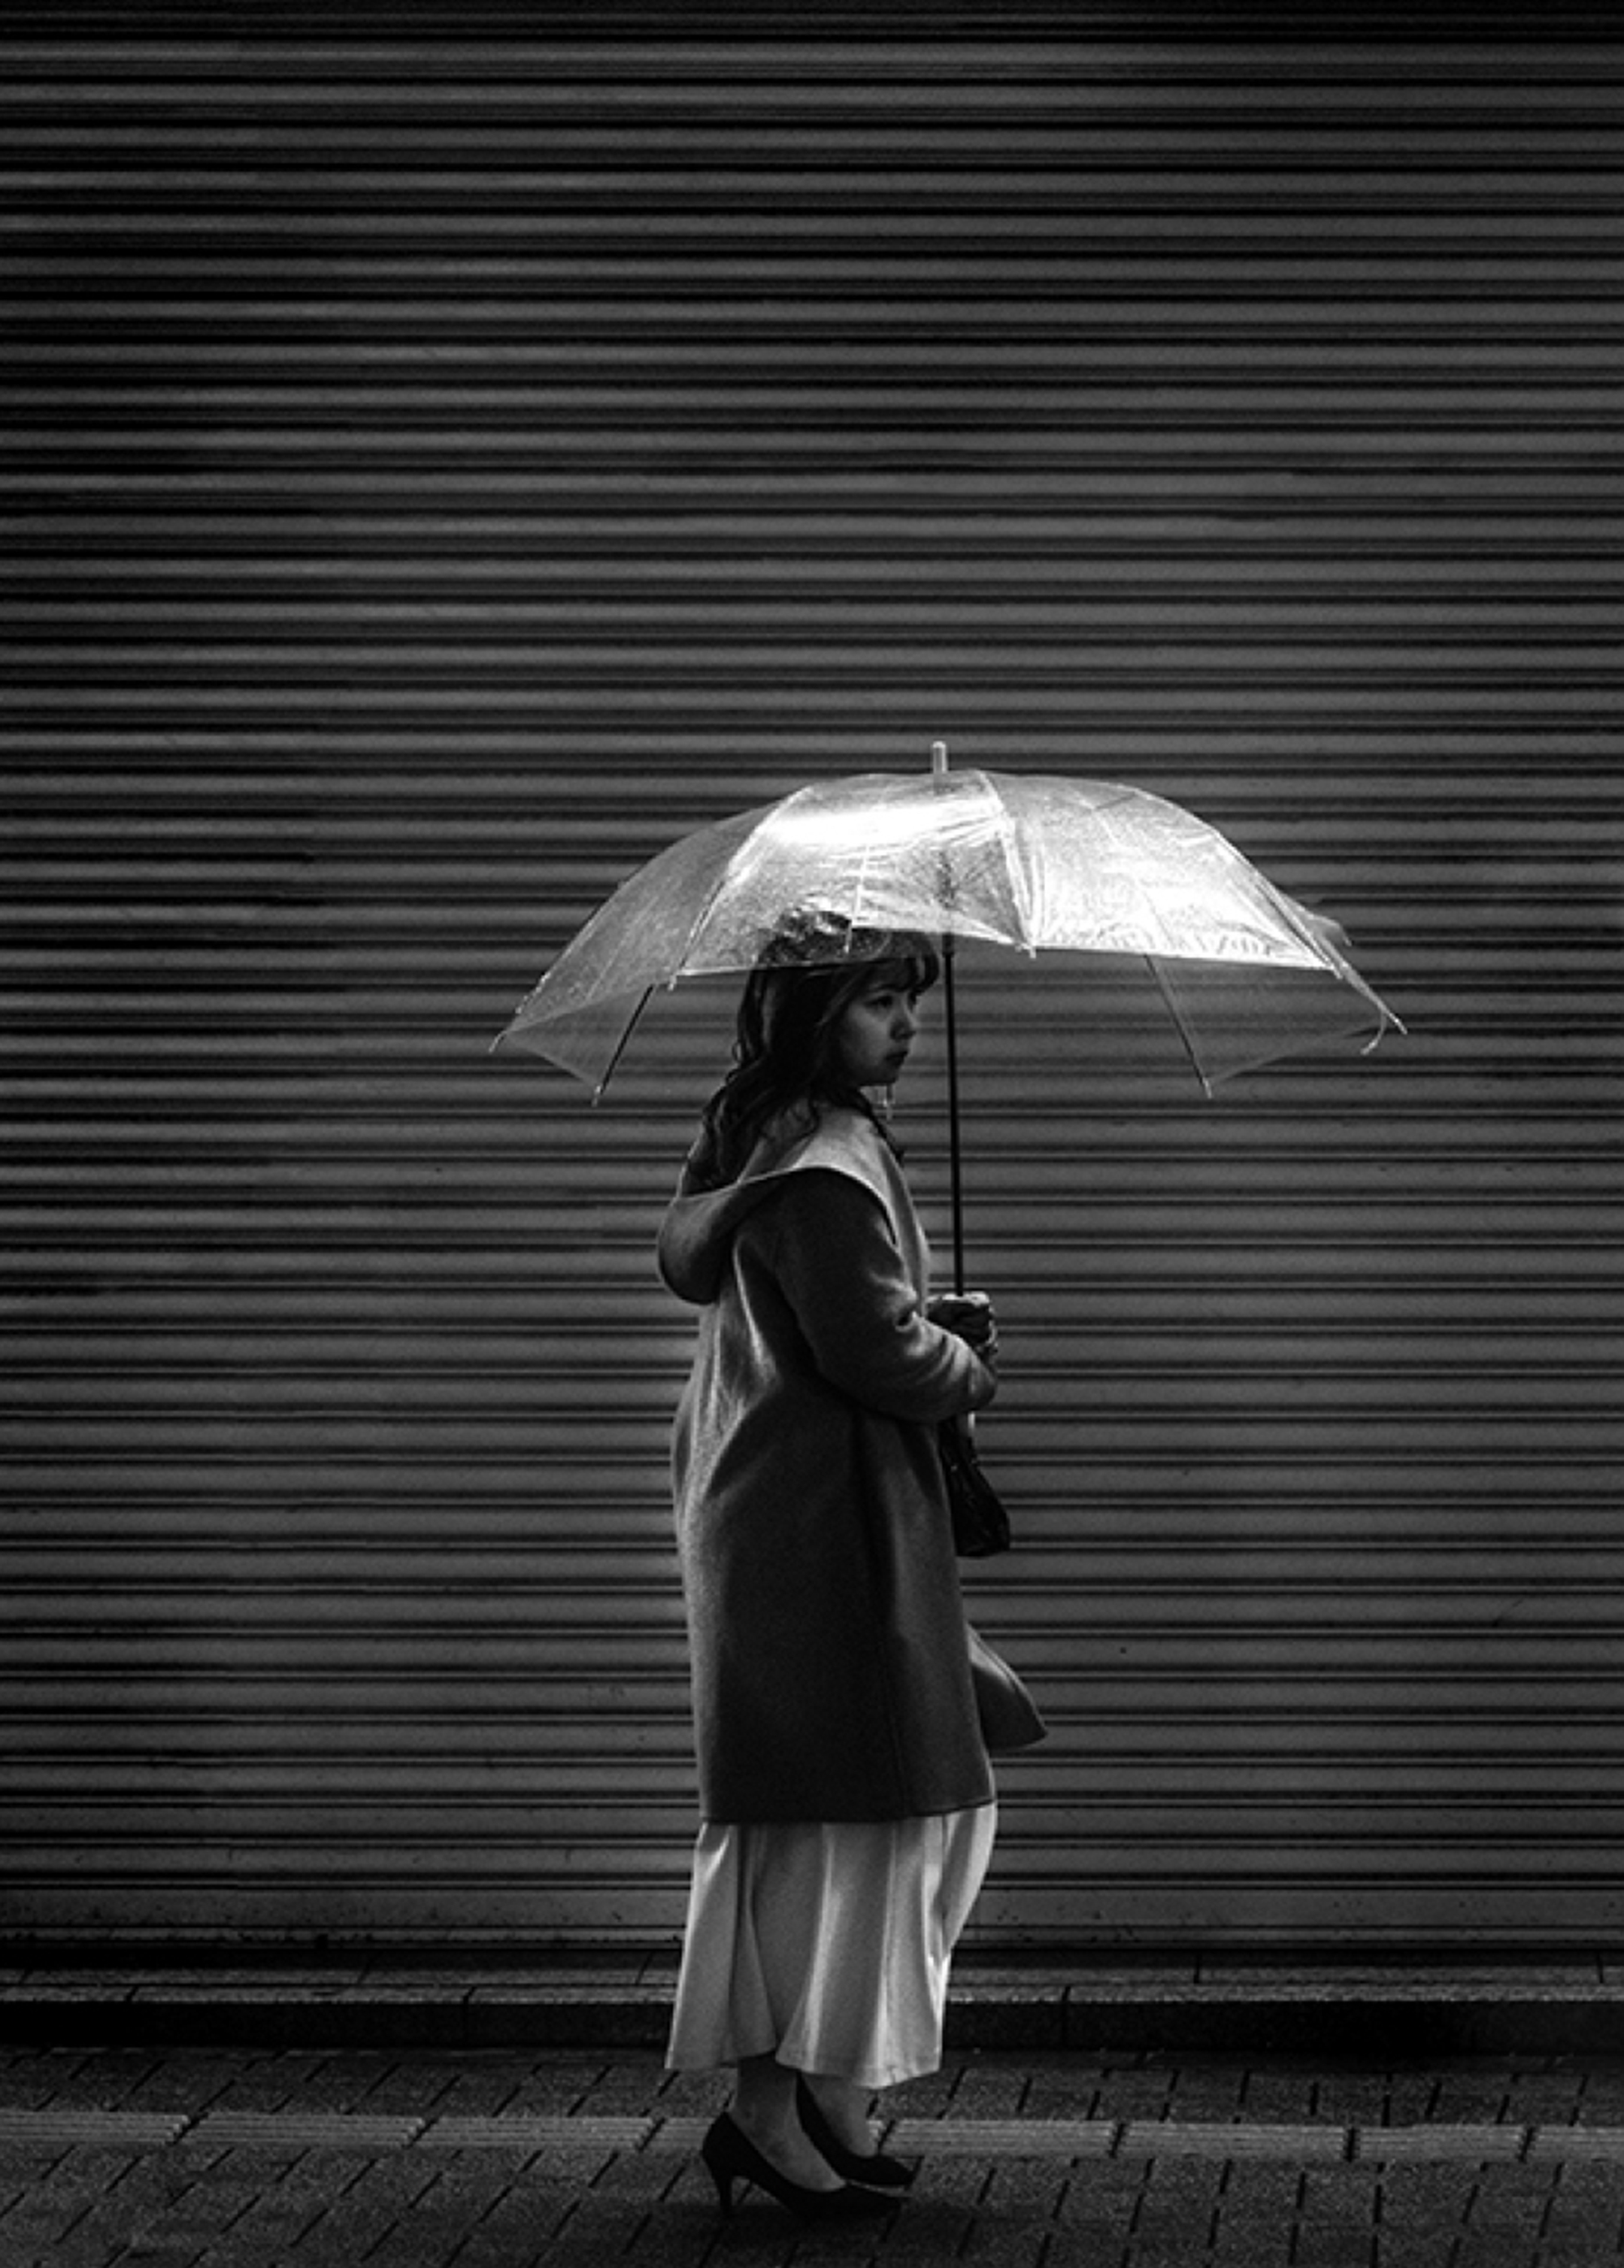 Black and white photo of a young woman holding an umbrella